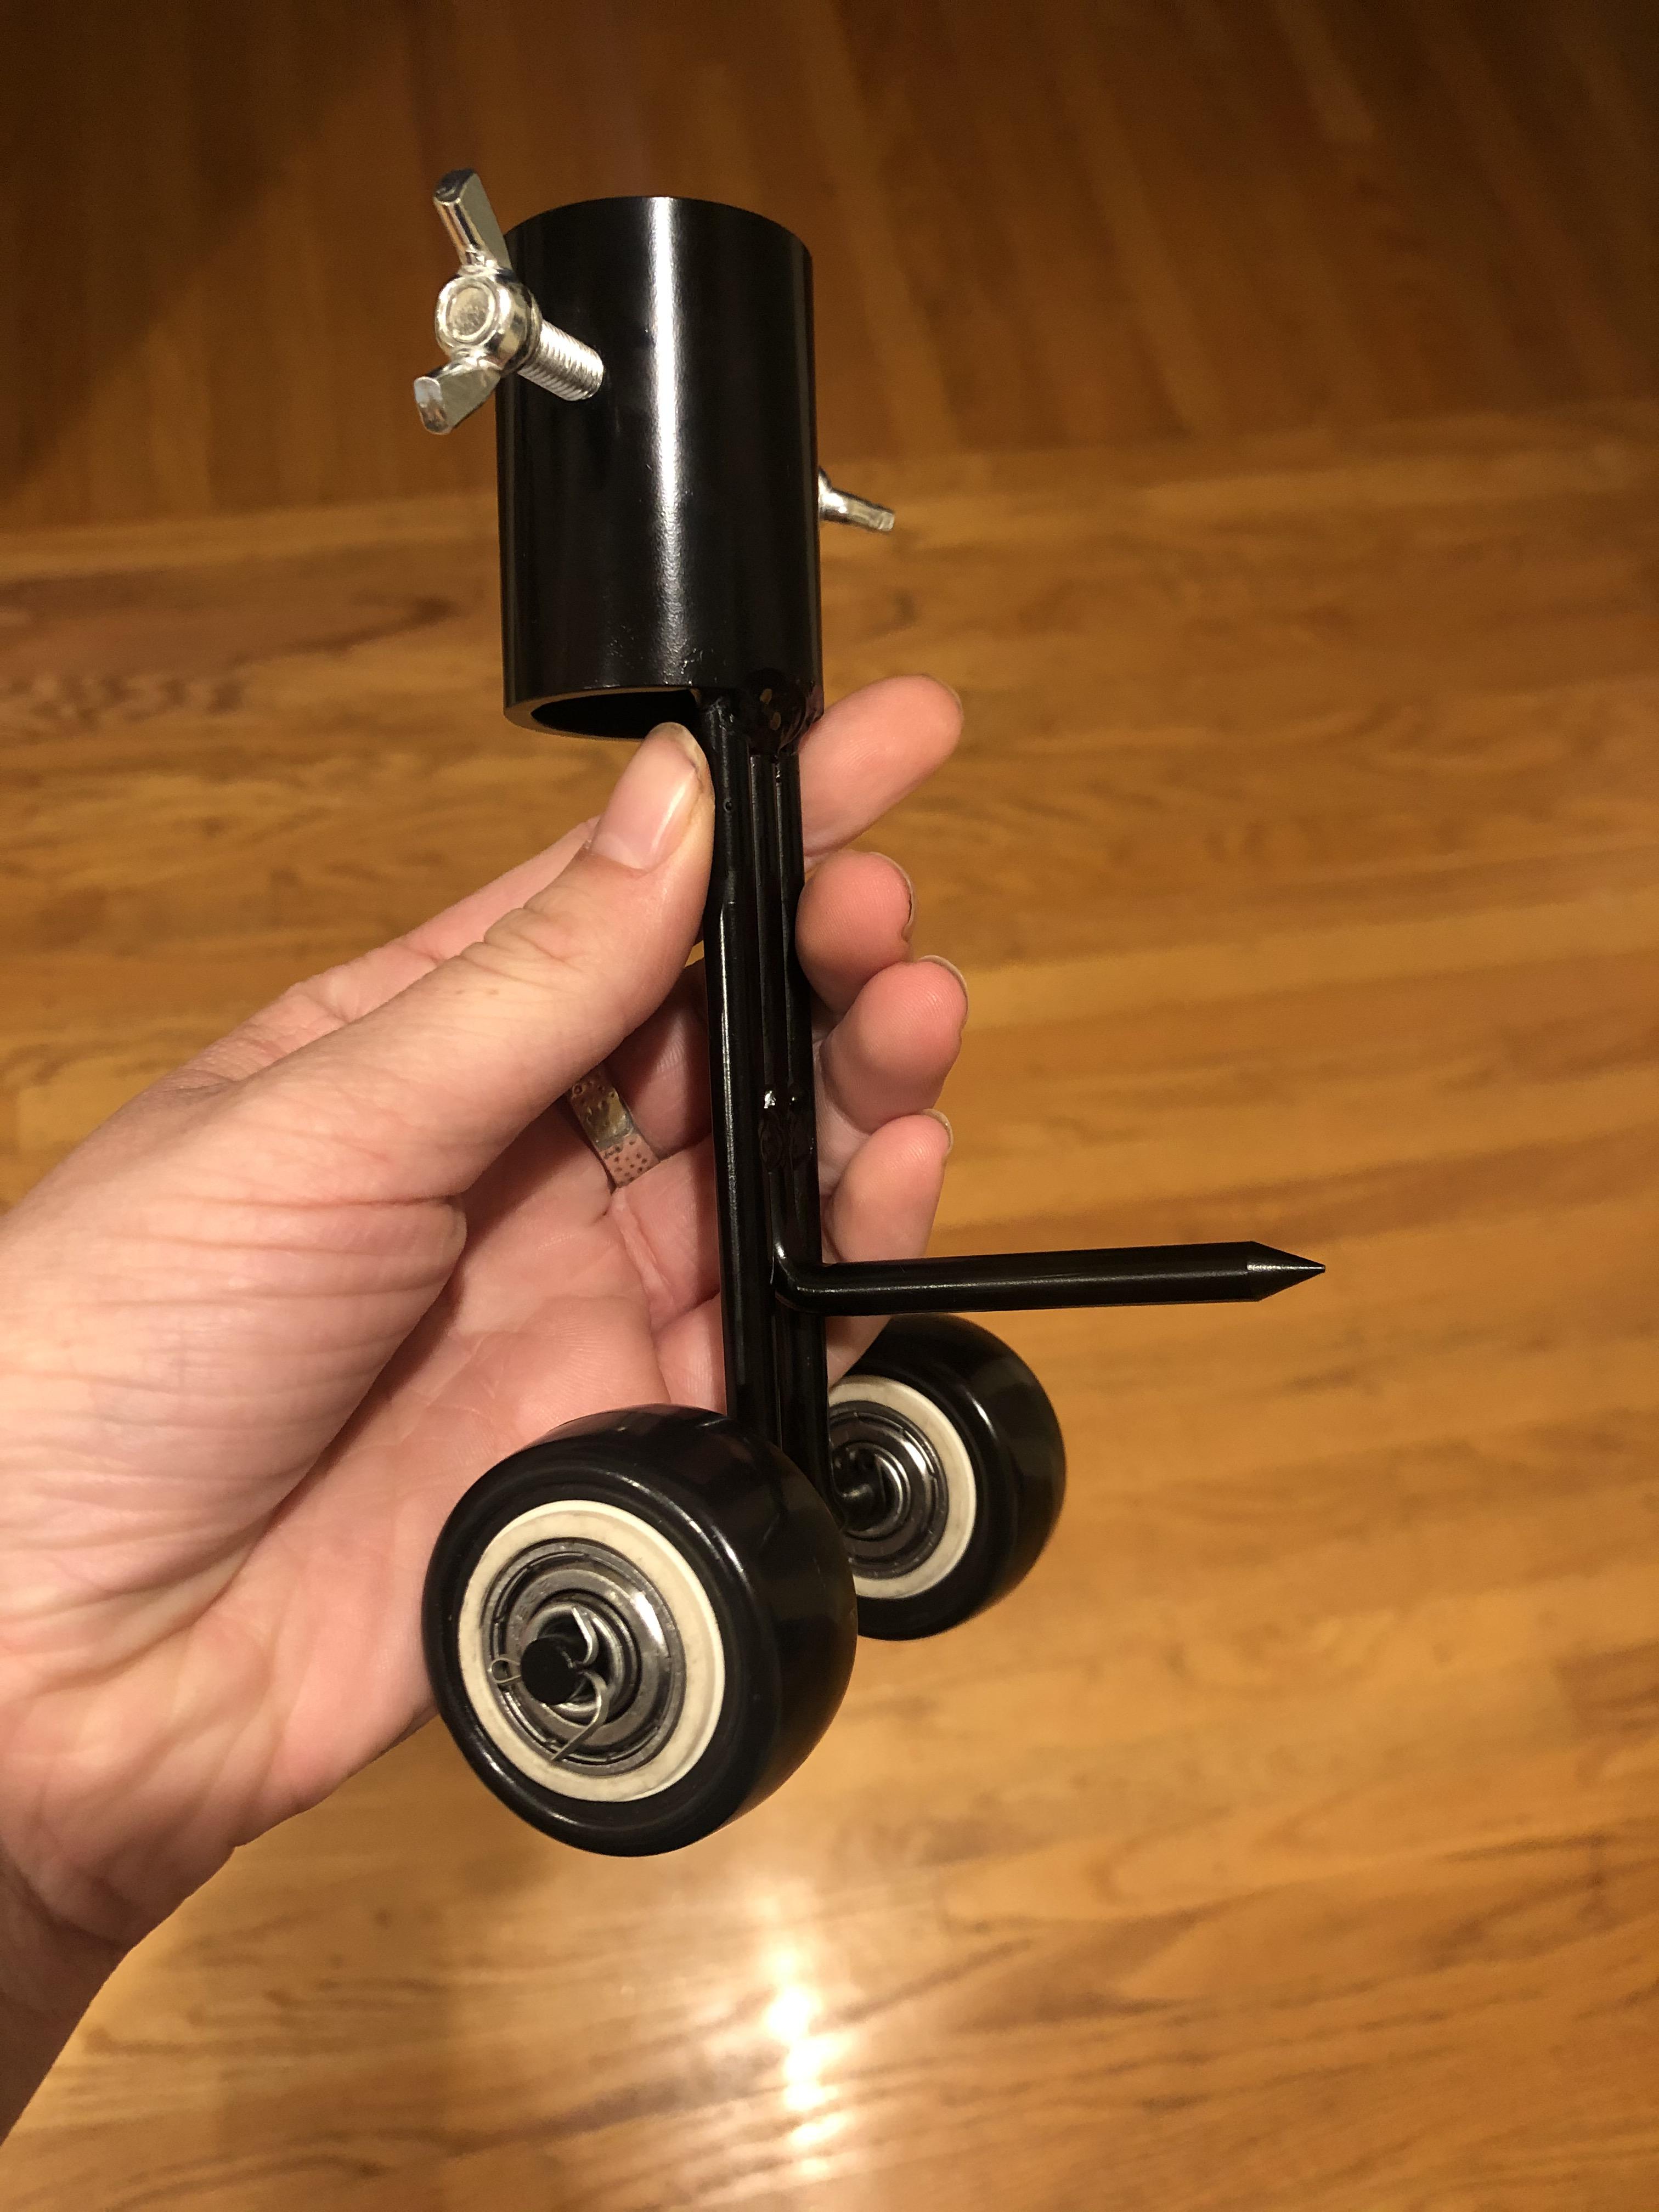 A Reddit user found this strange object in the mail and shared it on July 10, 2020 | Source: Reddit